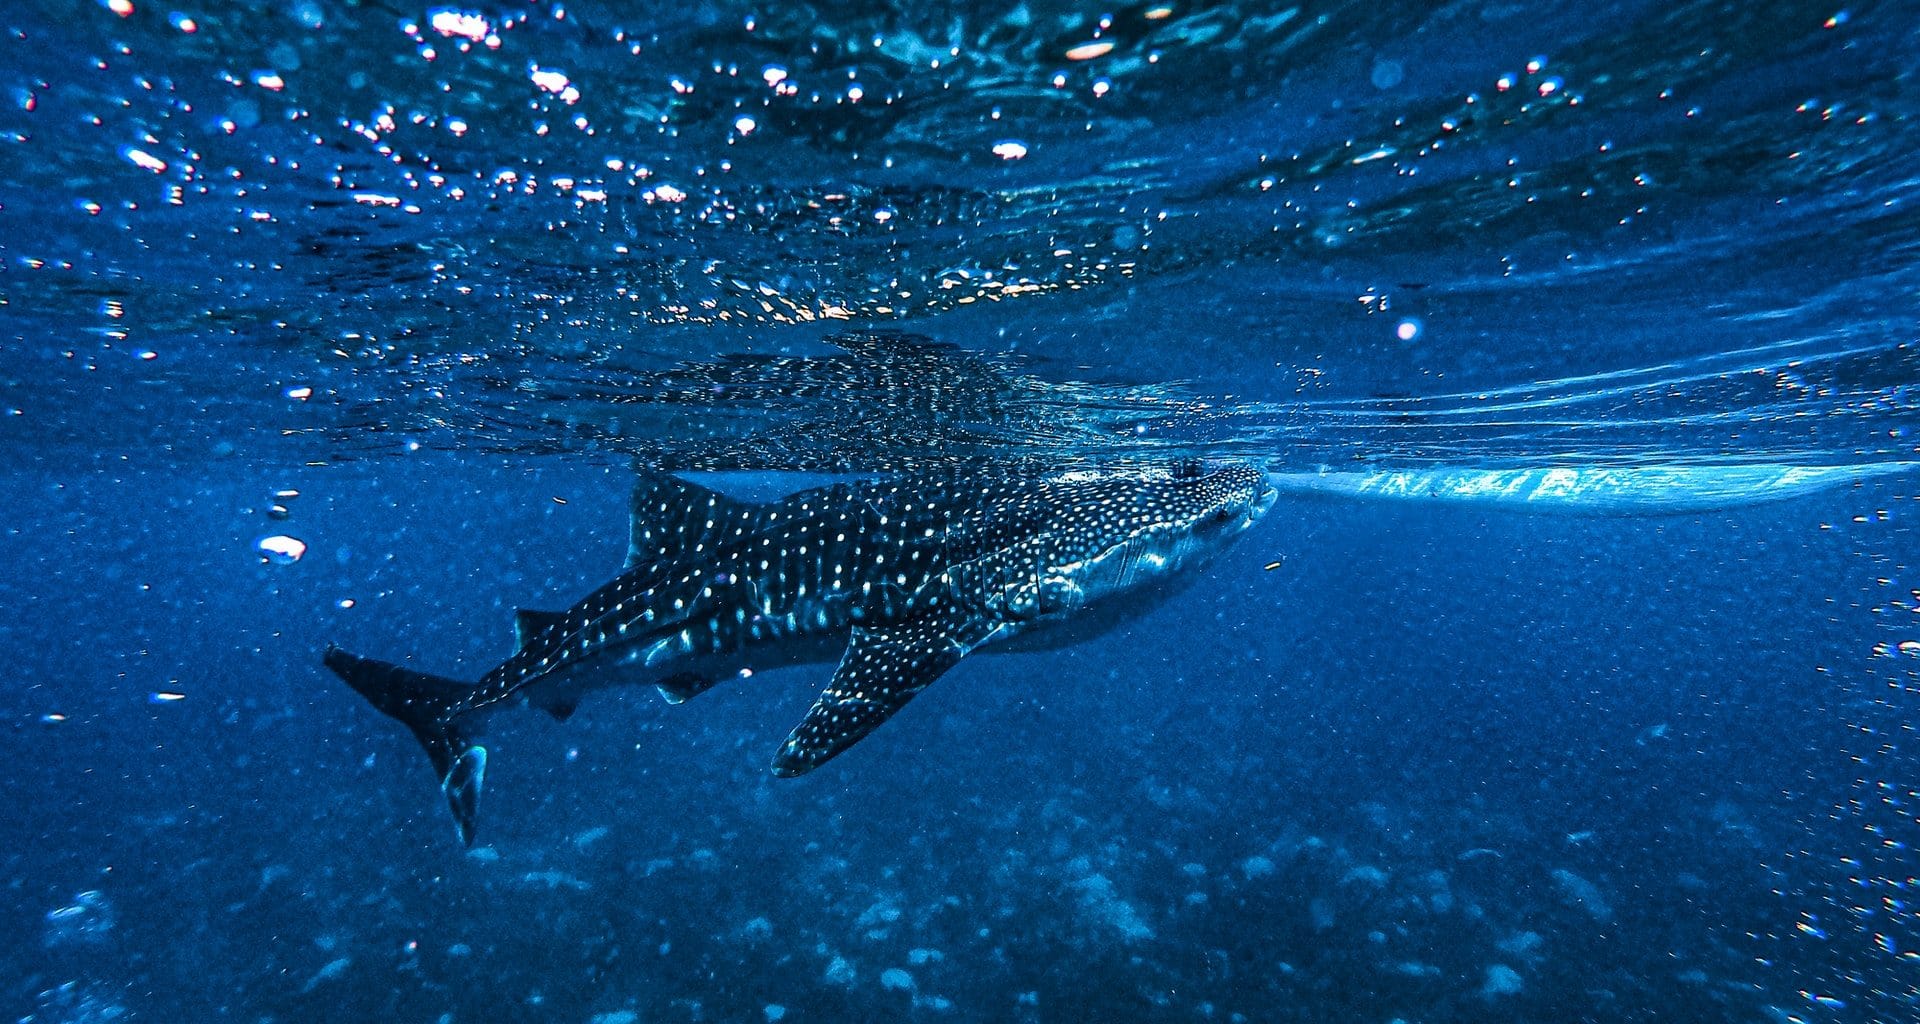 Whale Shark Facts - Featuring Image